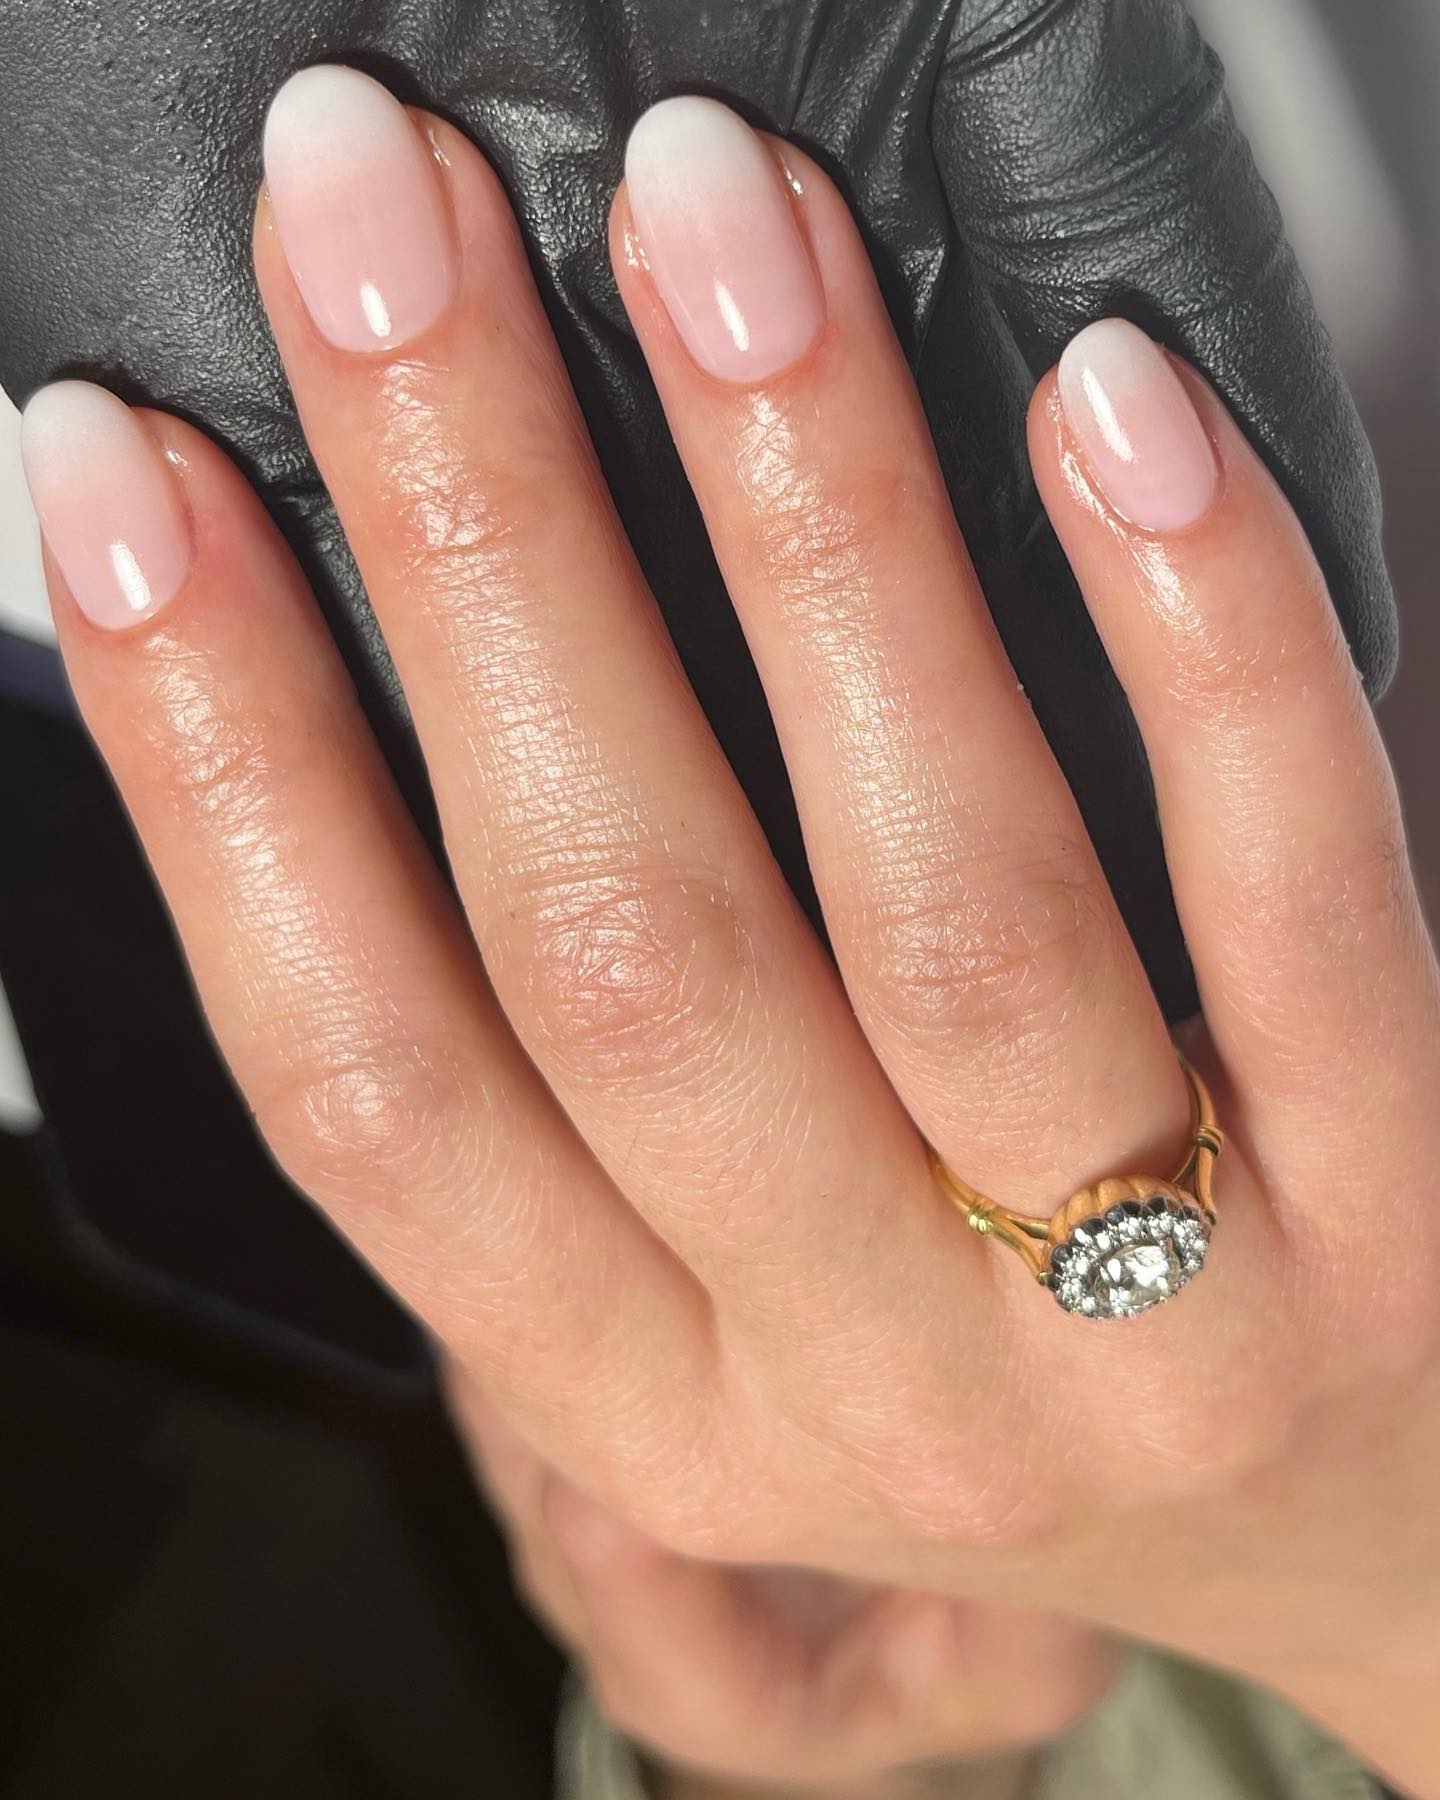 Pink and white ombre French manicure on oval nails